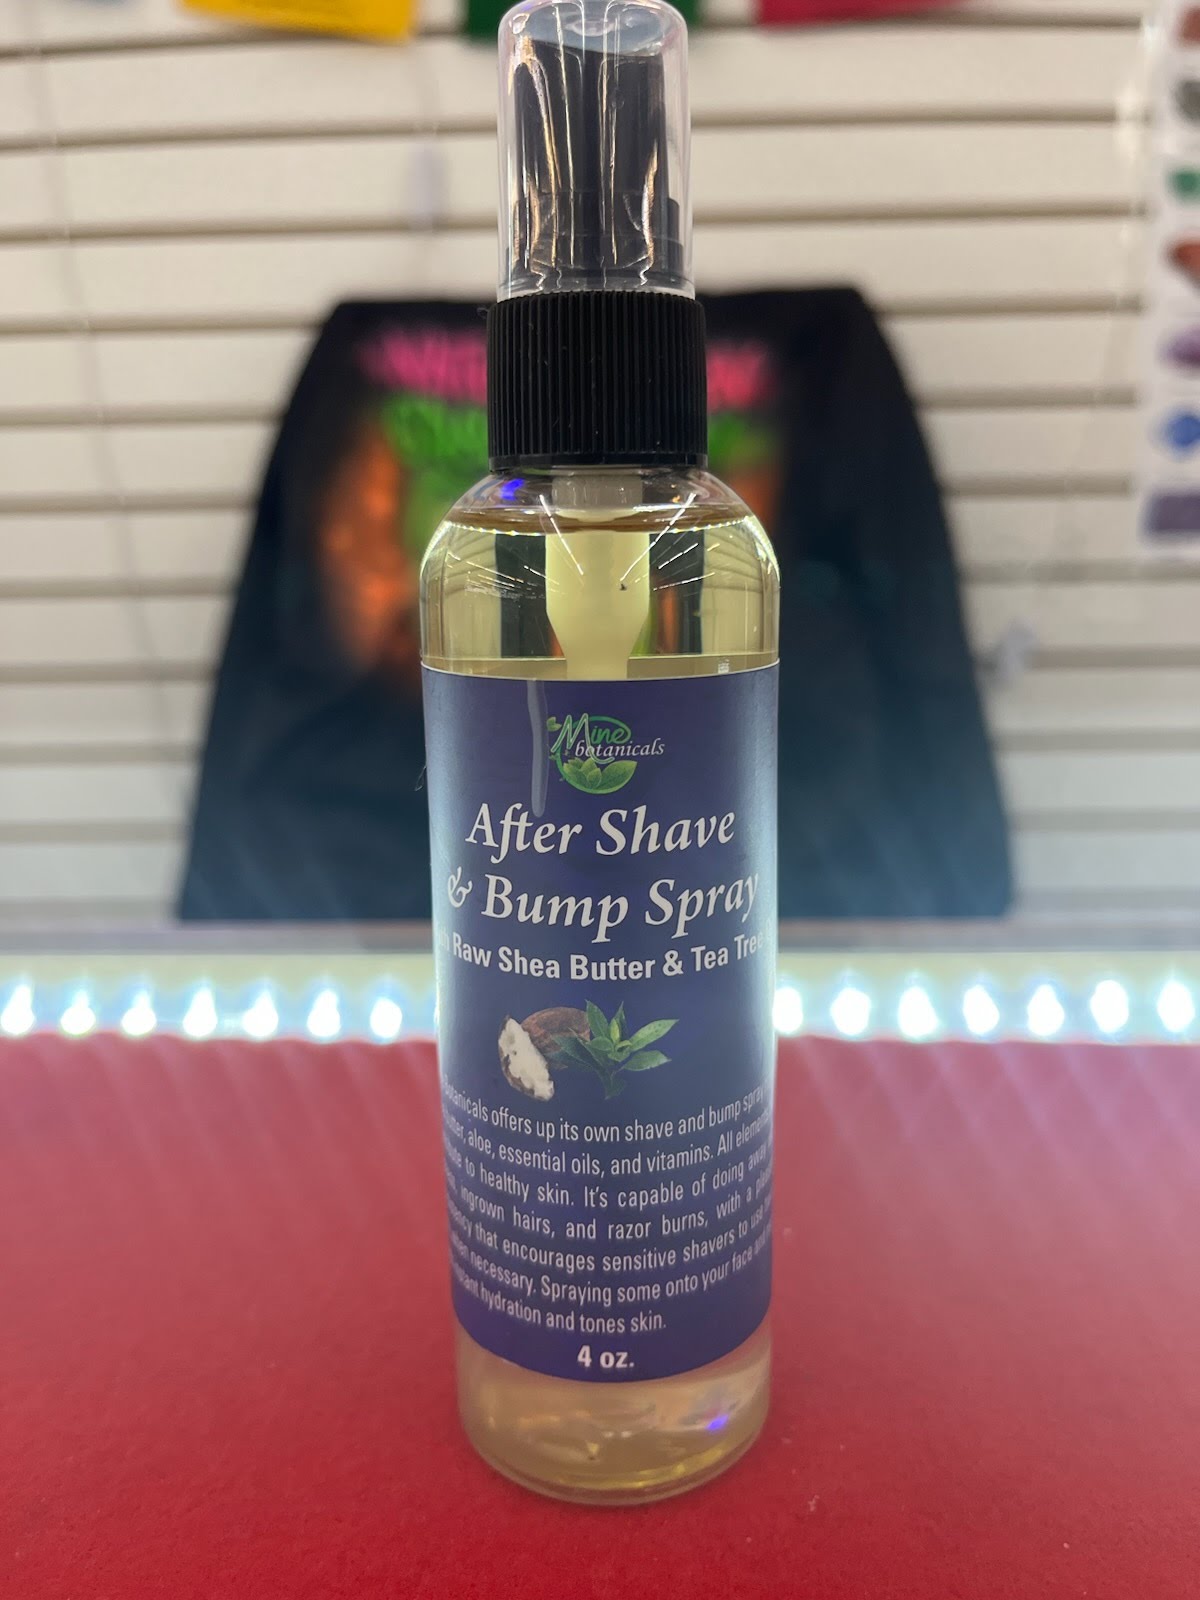 A bottle of after shave bump spray